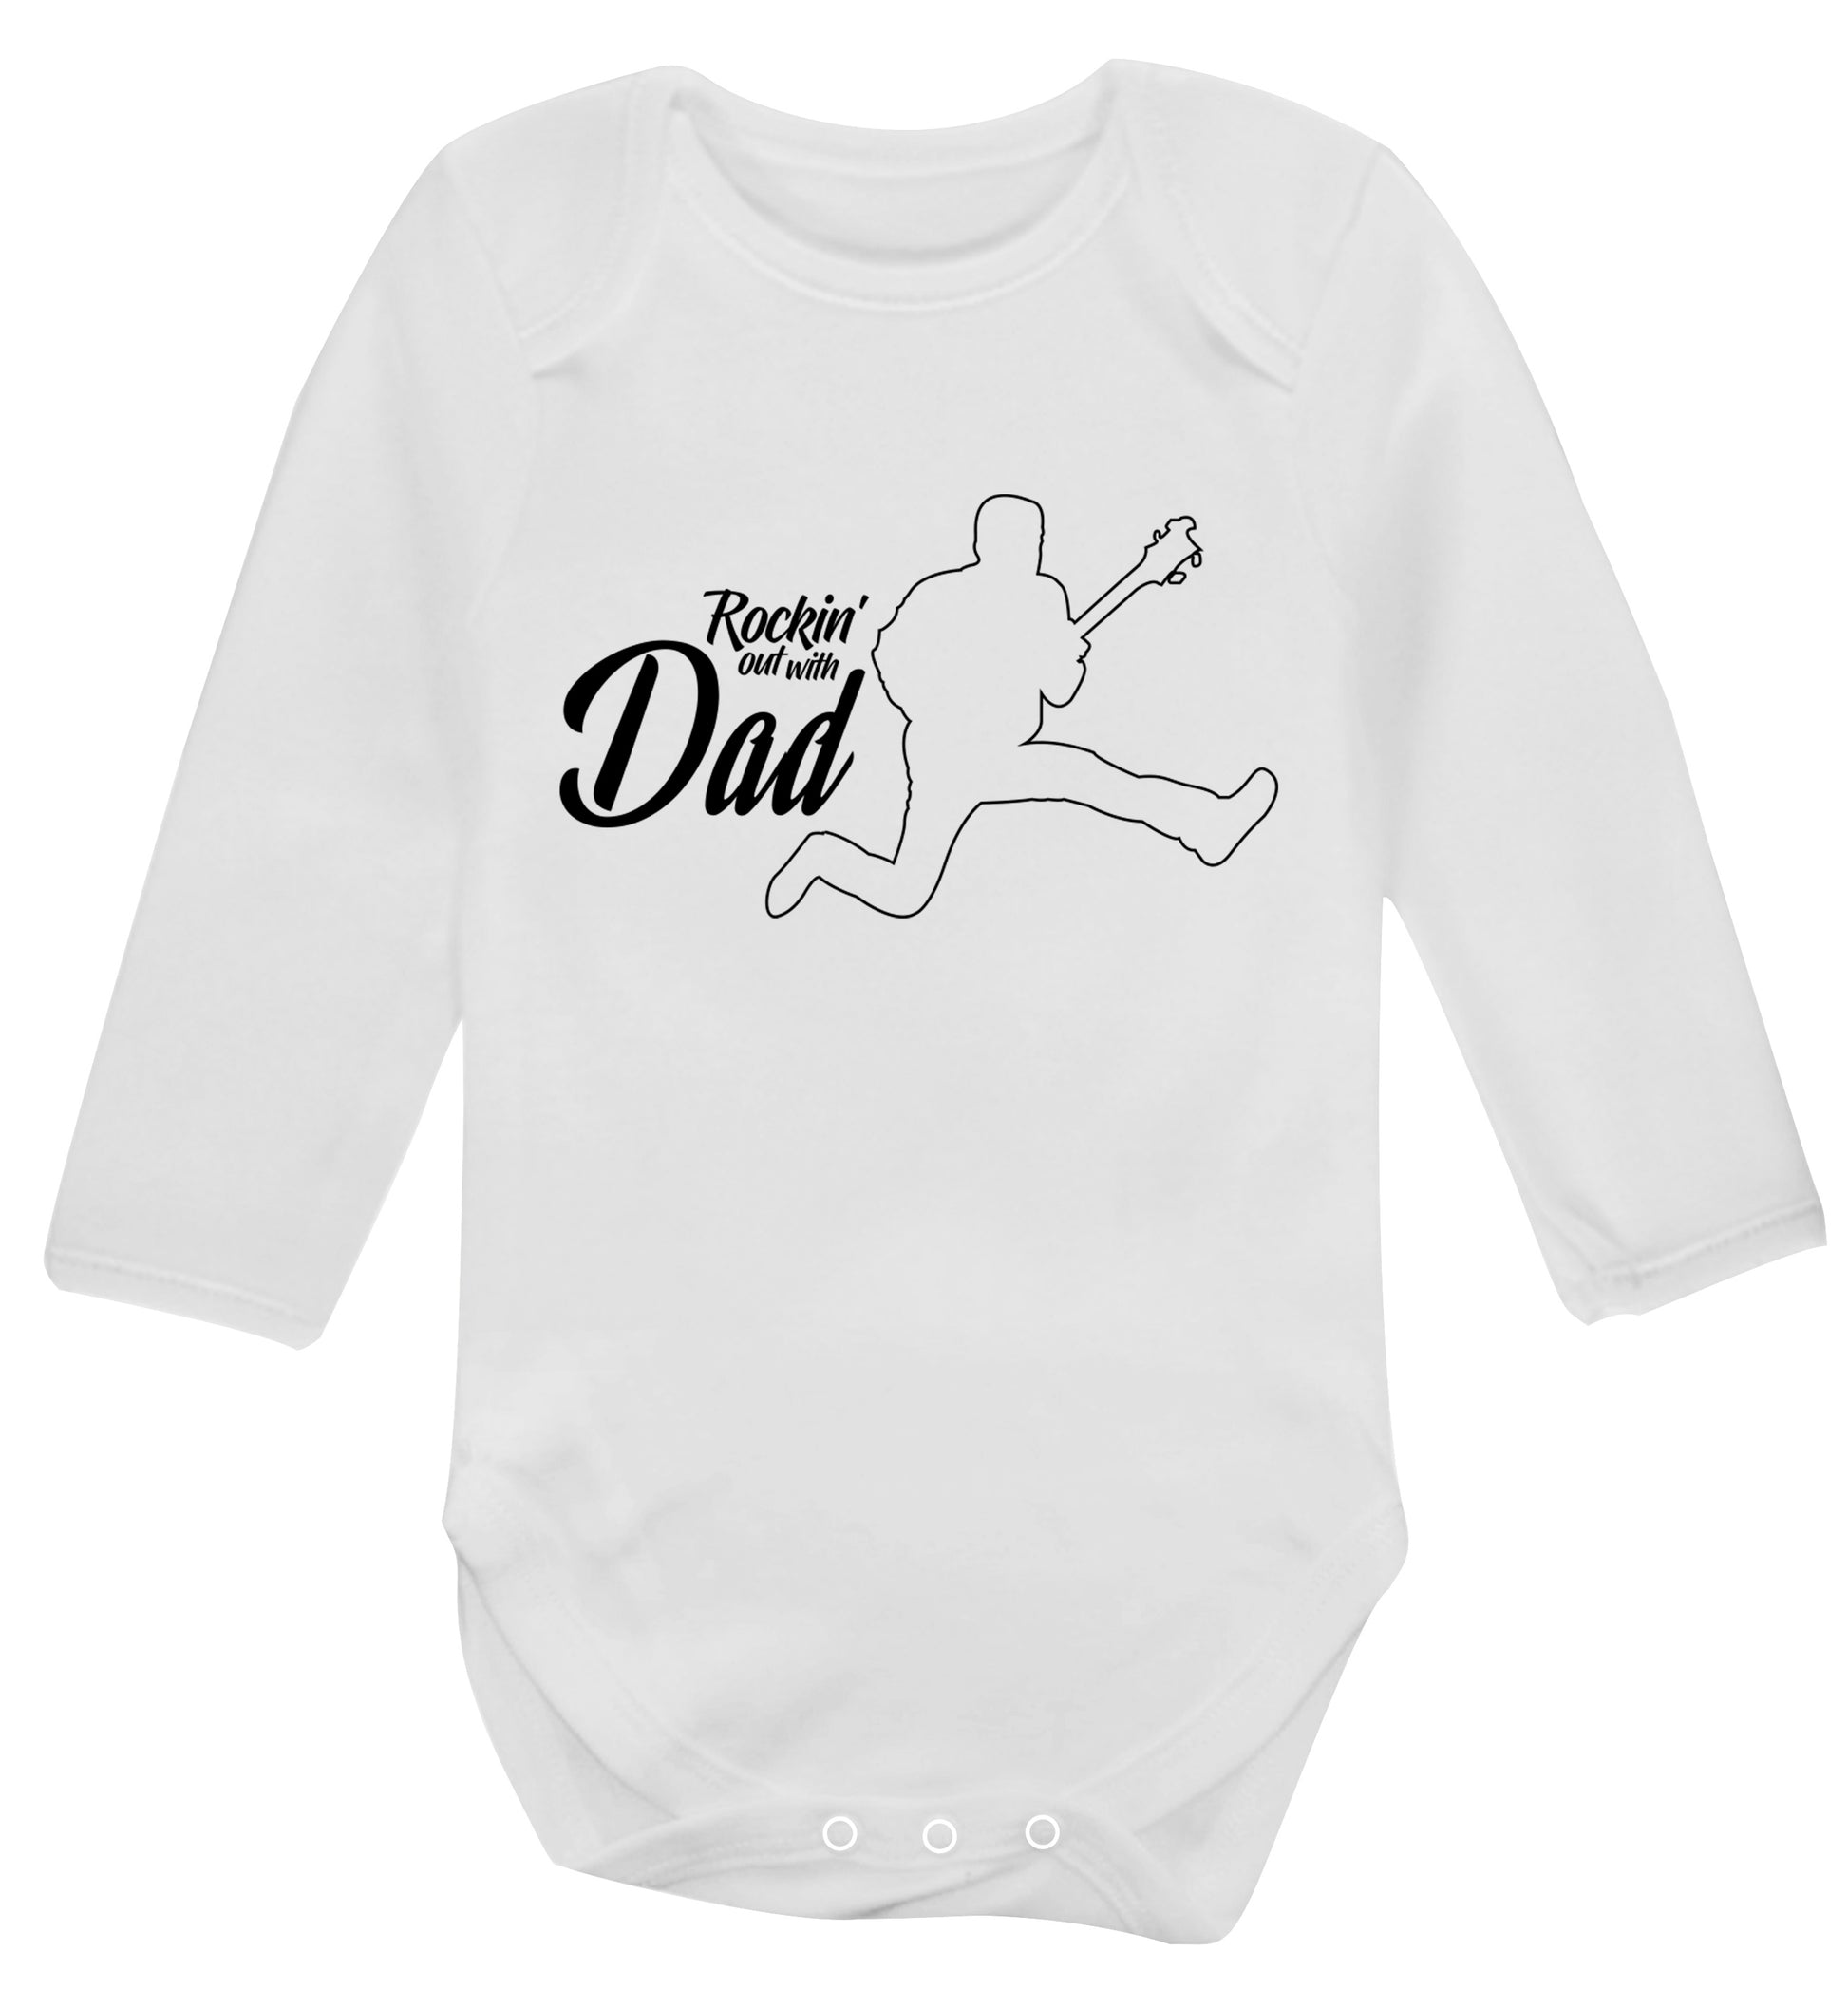 Rockin out with dad Baby Vest long sleeved white 6-12 months